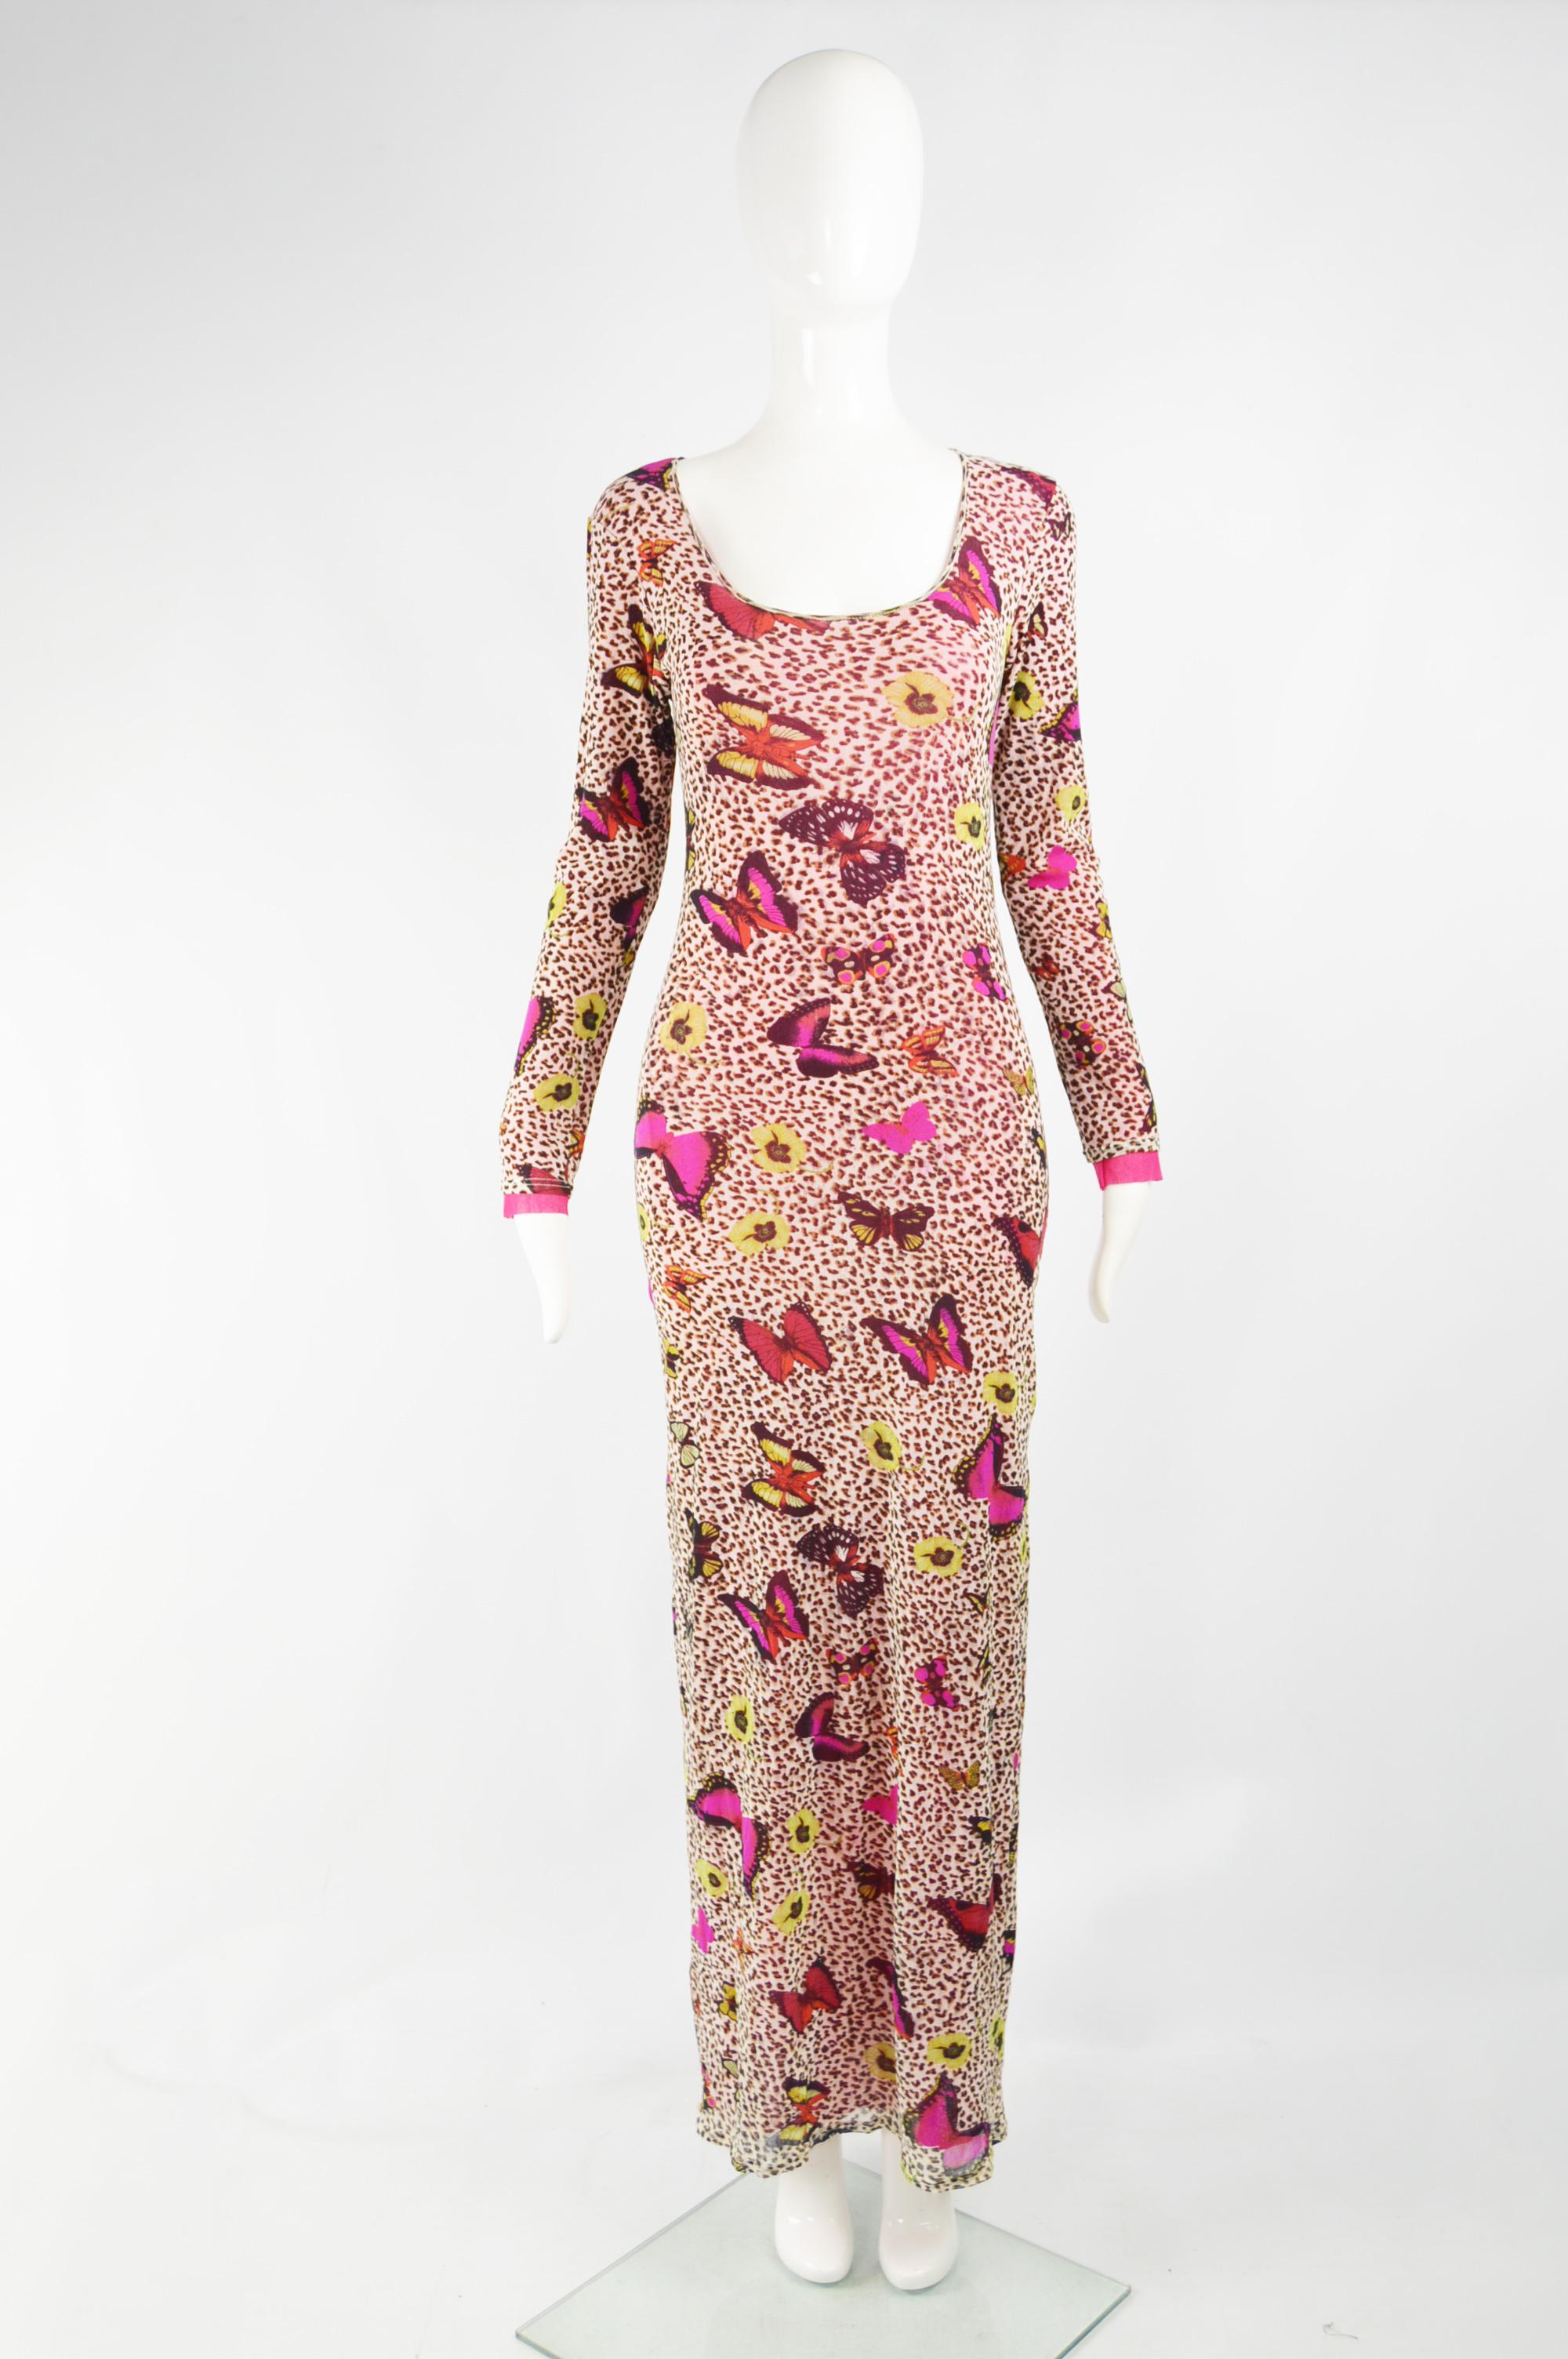 A fabulous and rare vintage womens Kenzo maxi dress from the 90s in a leopard and butterfly print sheer mesh fabric that has a further pink mesh lining. Perfect for the day in spring and summer or worn at a party. 

Size: Marked vintage L but fits a